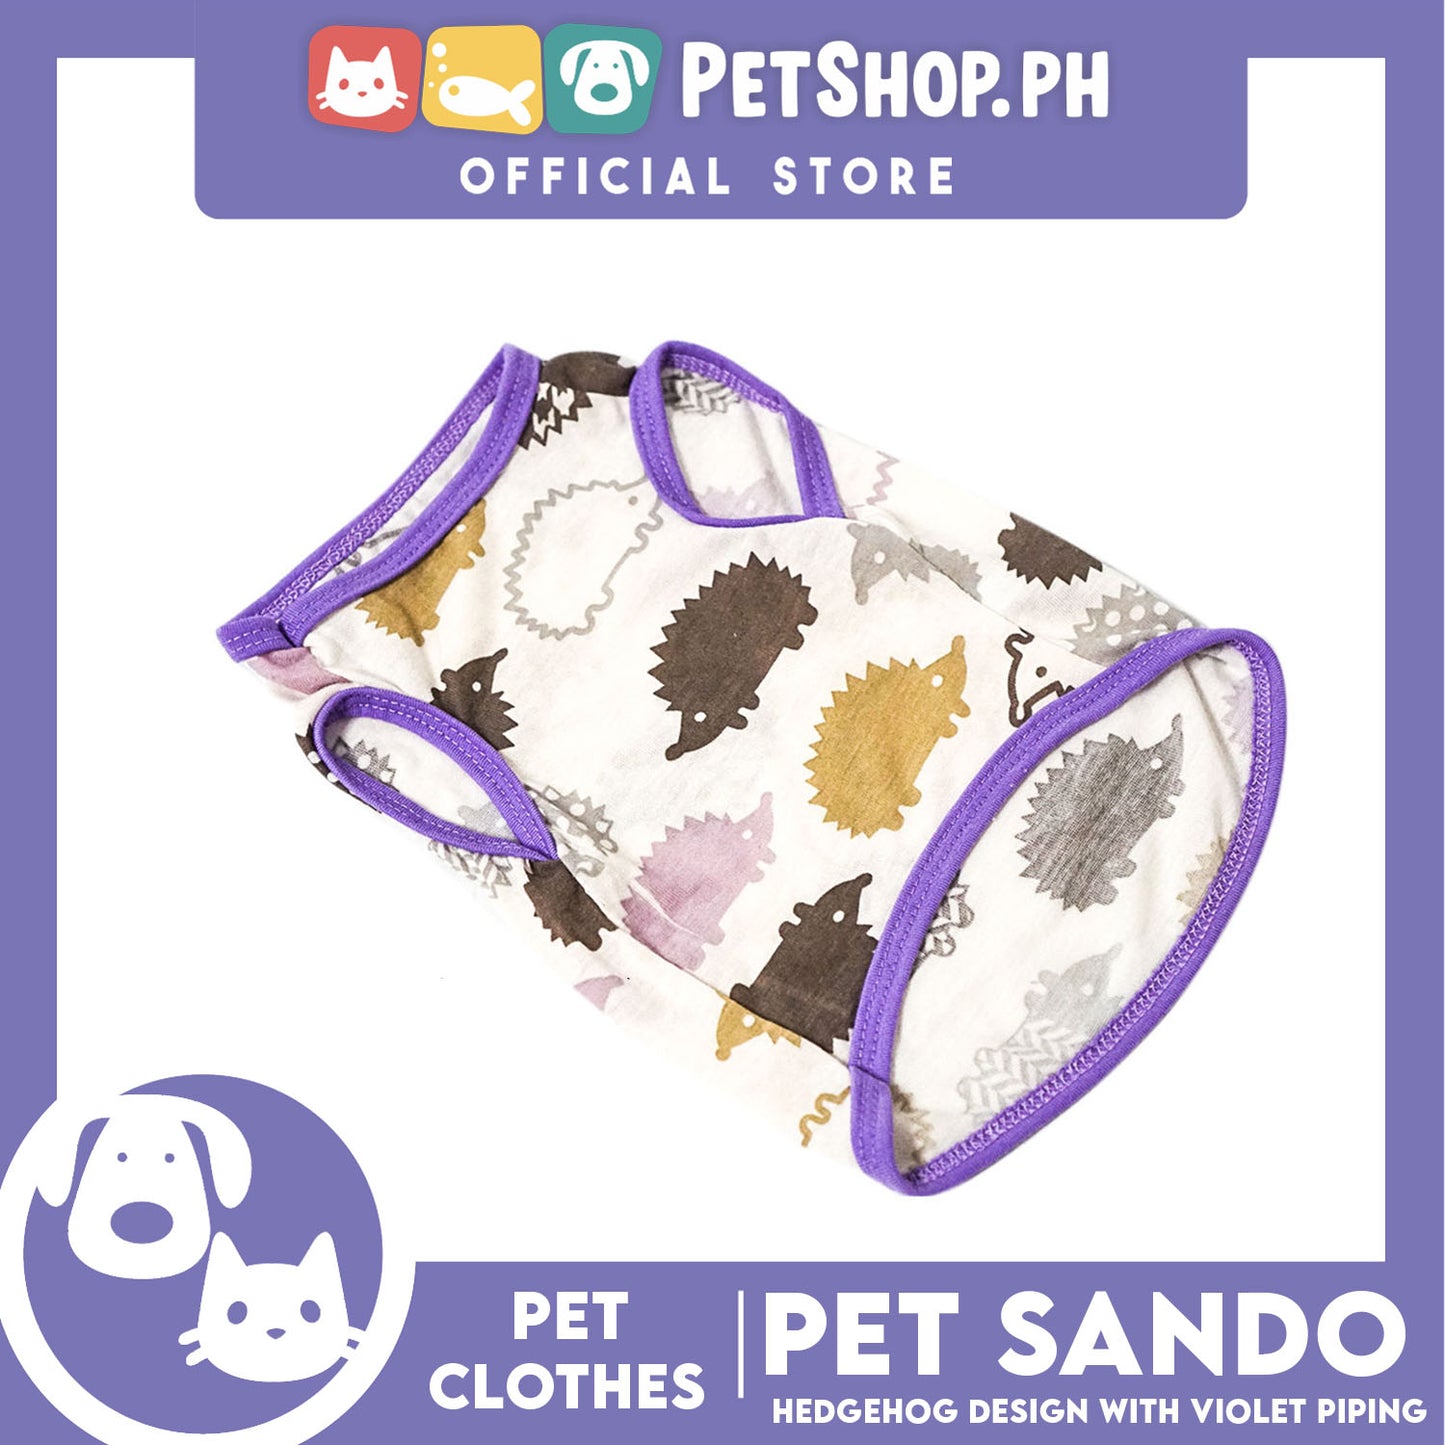 Pet Sando Hedgehog Design with violet piping (Extra Large) Pet Clothes Perfect Fit for Dogs